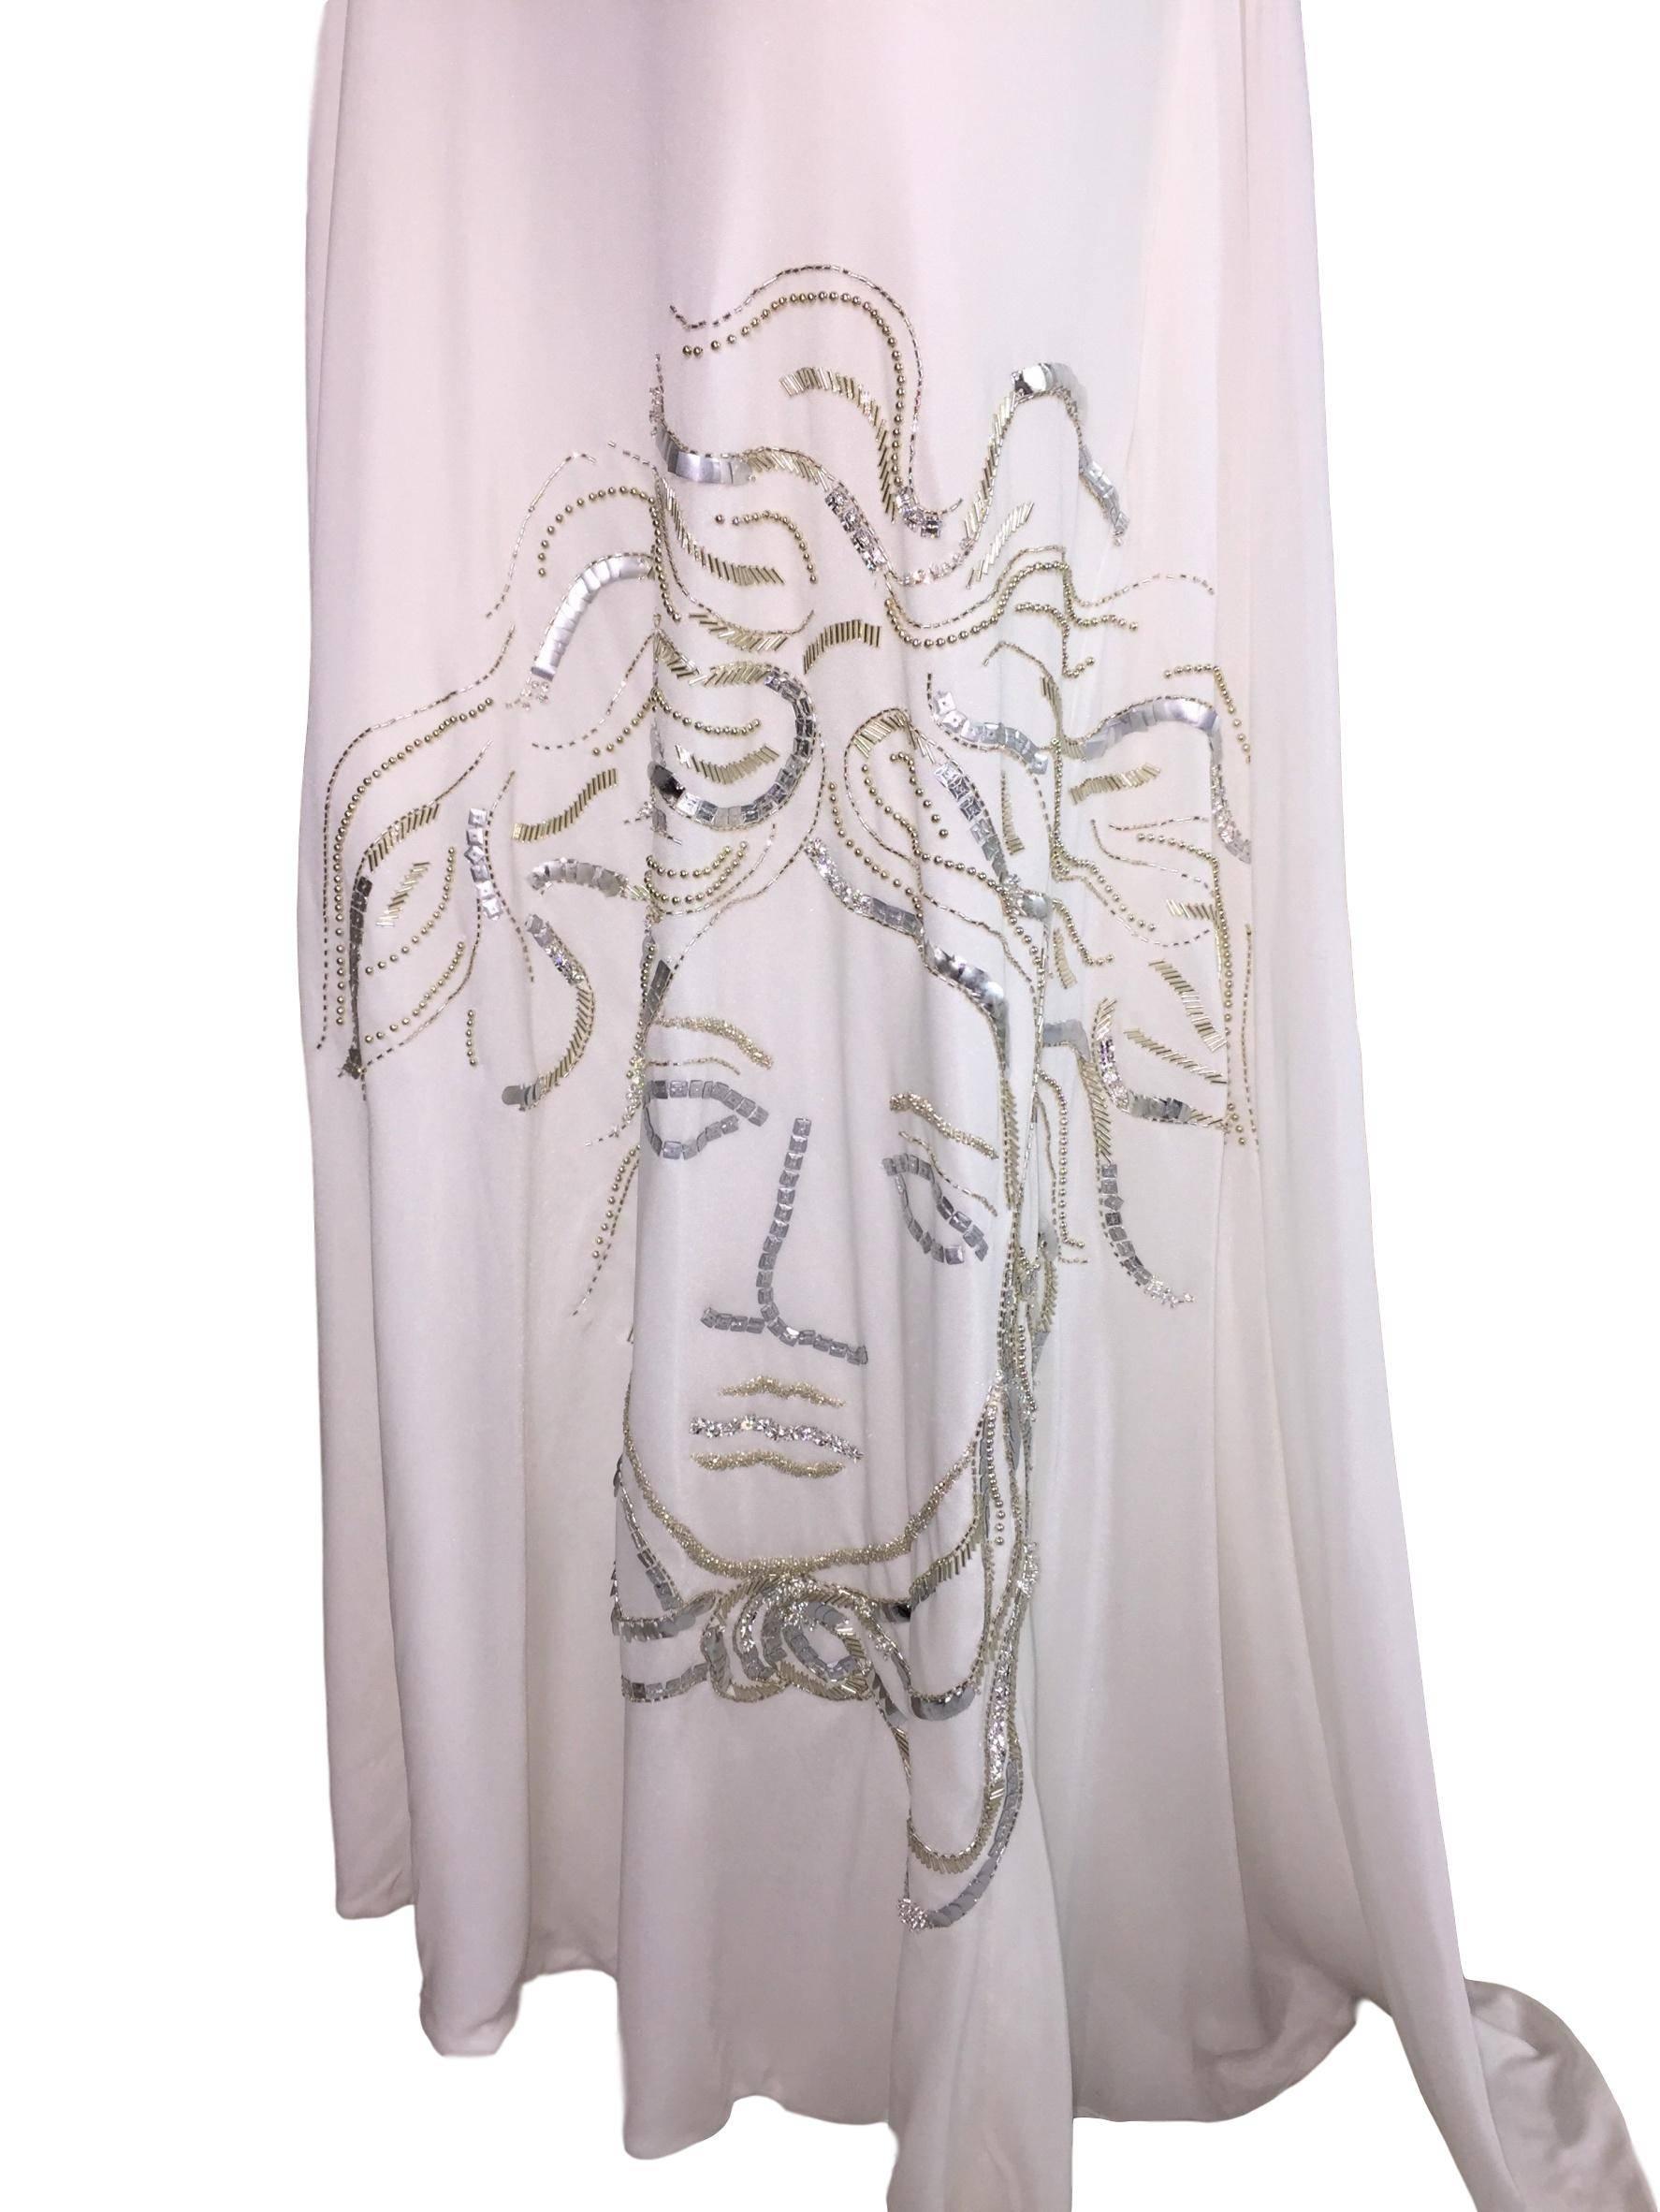 F/W 1999 Atelier Versace Sheer White Plunging Beaded Medusa Gown Dress In Good Condition In Yukon, OK